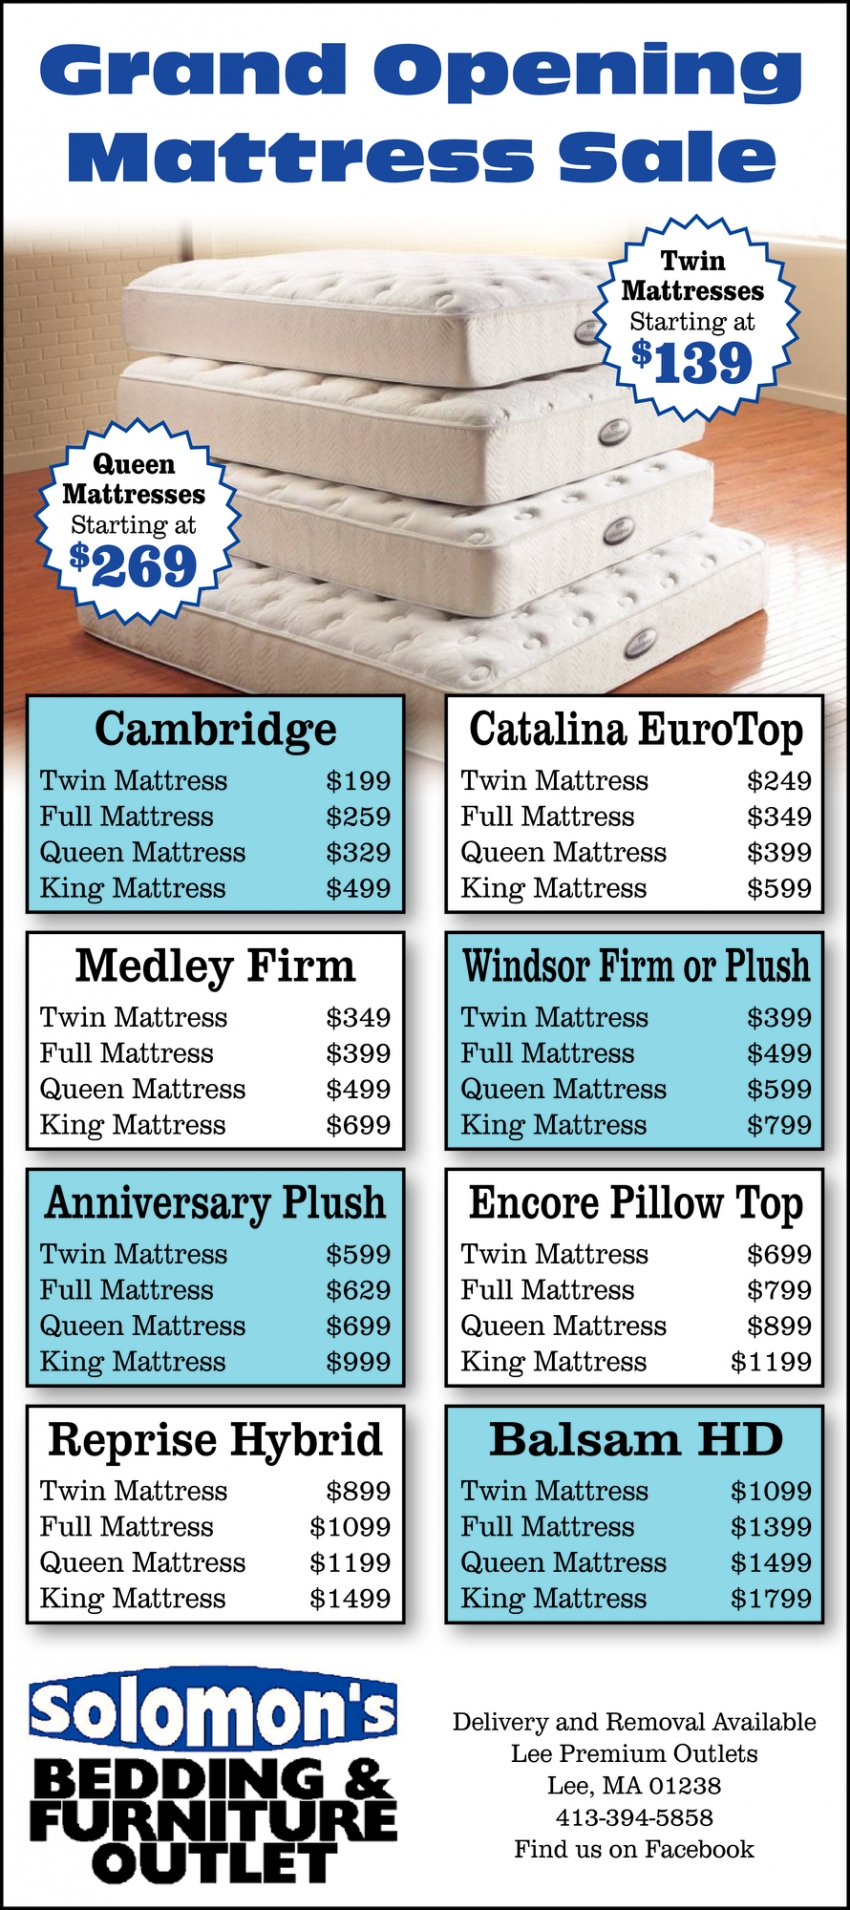 Grand Opening Mattress Sale, Solomon's Bedding & Furniture Outlet